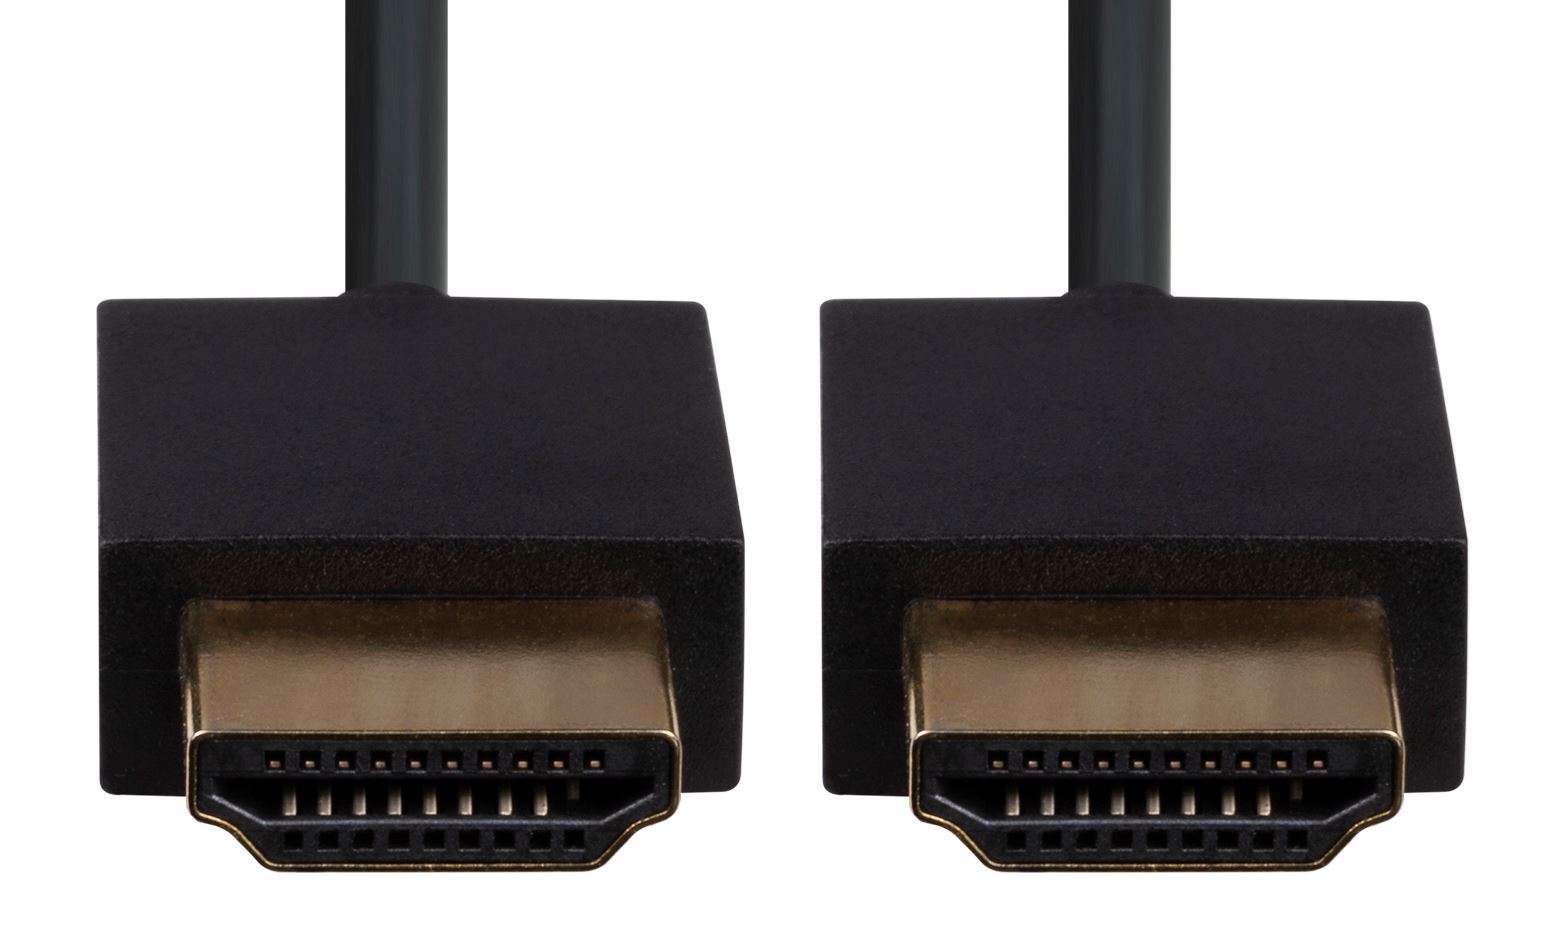 DYNAMIX_3M_HDMI_BLACK_Nano_High_Speed_With_Ethernet_Cable._Designed_for_UHD_Display_up_to_4K2K@60Hz._Slimline_Robust_Cable._Supports_CEC_2.0,_3D,_&_ARC._Supports_Up_to_32_Audio_Channels. 685